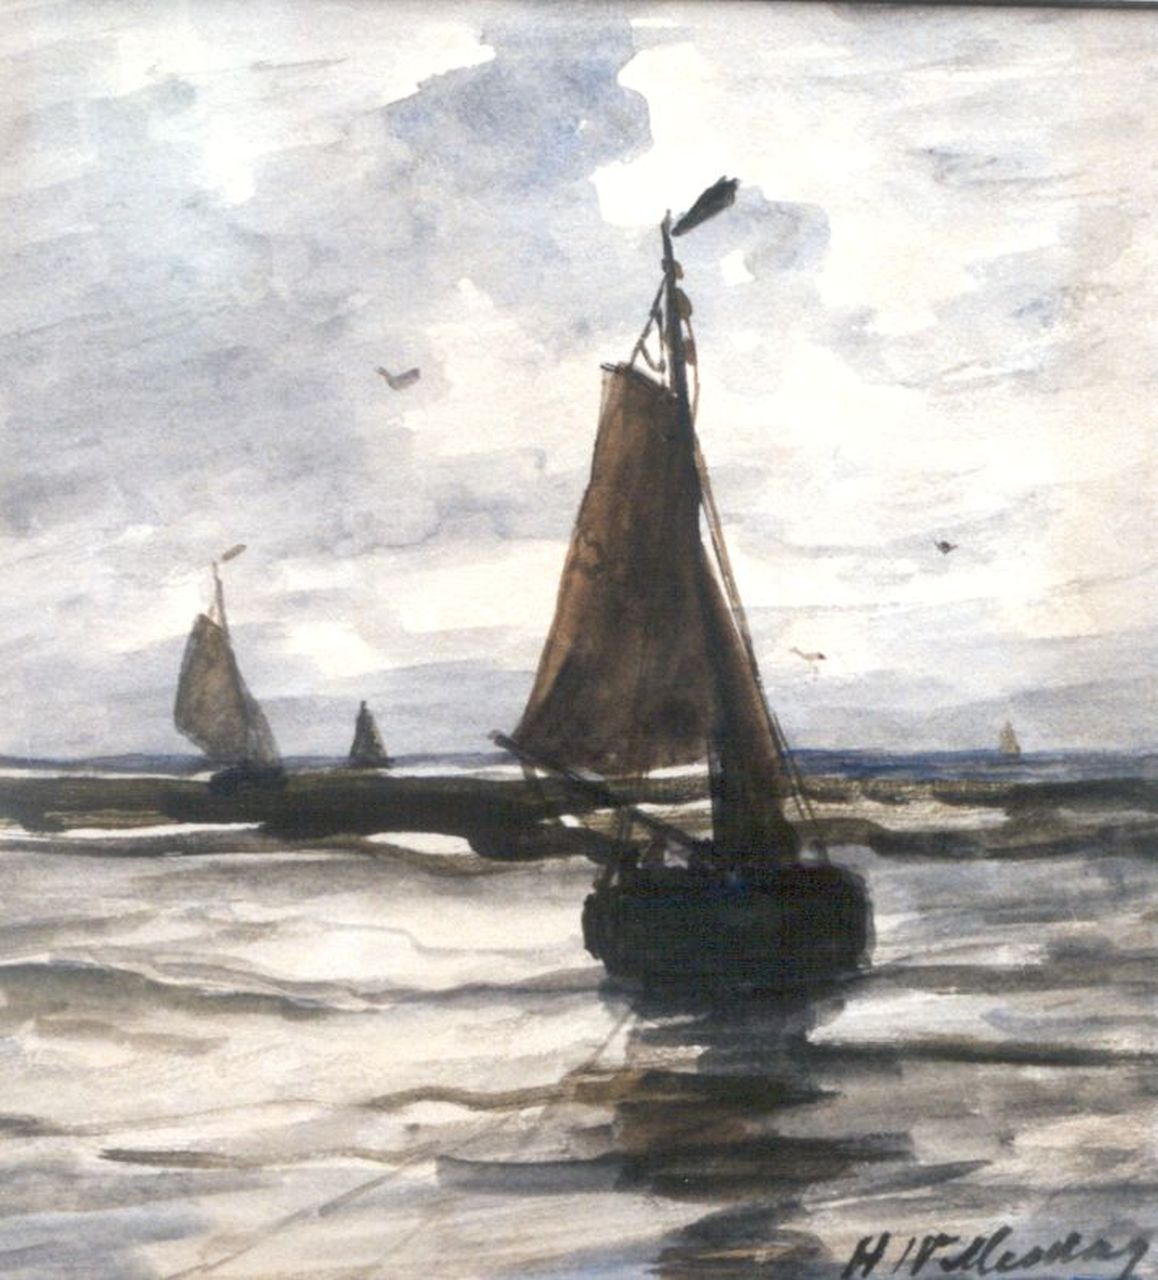 Mesdag H.W.  | Hendrik Willem Mesdag, Moored 'bomschuiten' in the surf, watercolour on paper 19.5 x 17.0 cm, signed l.r.